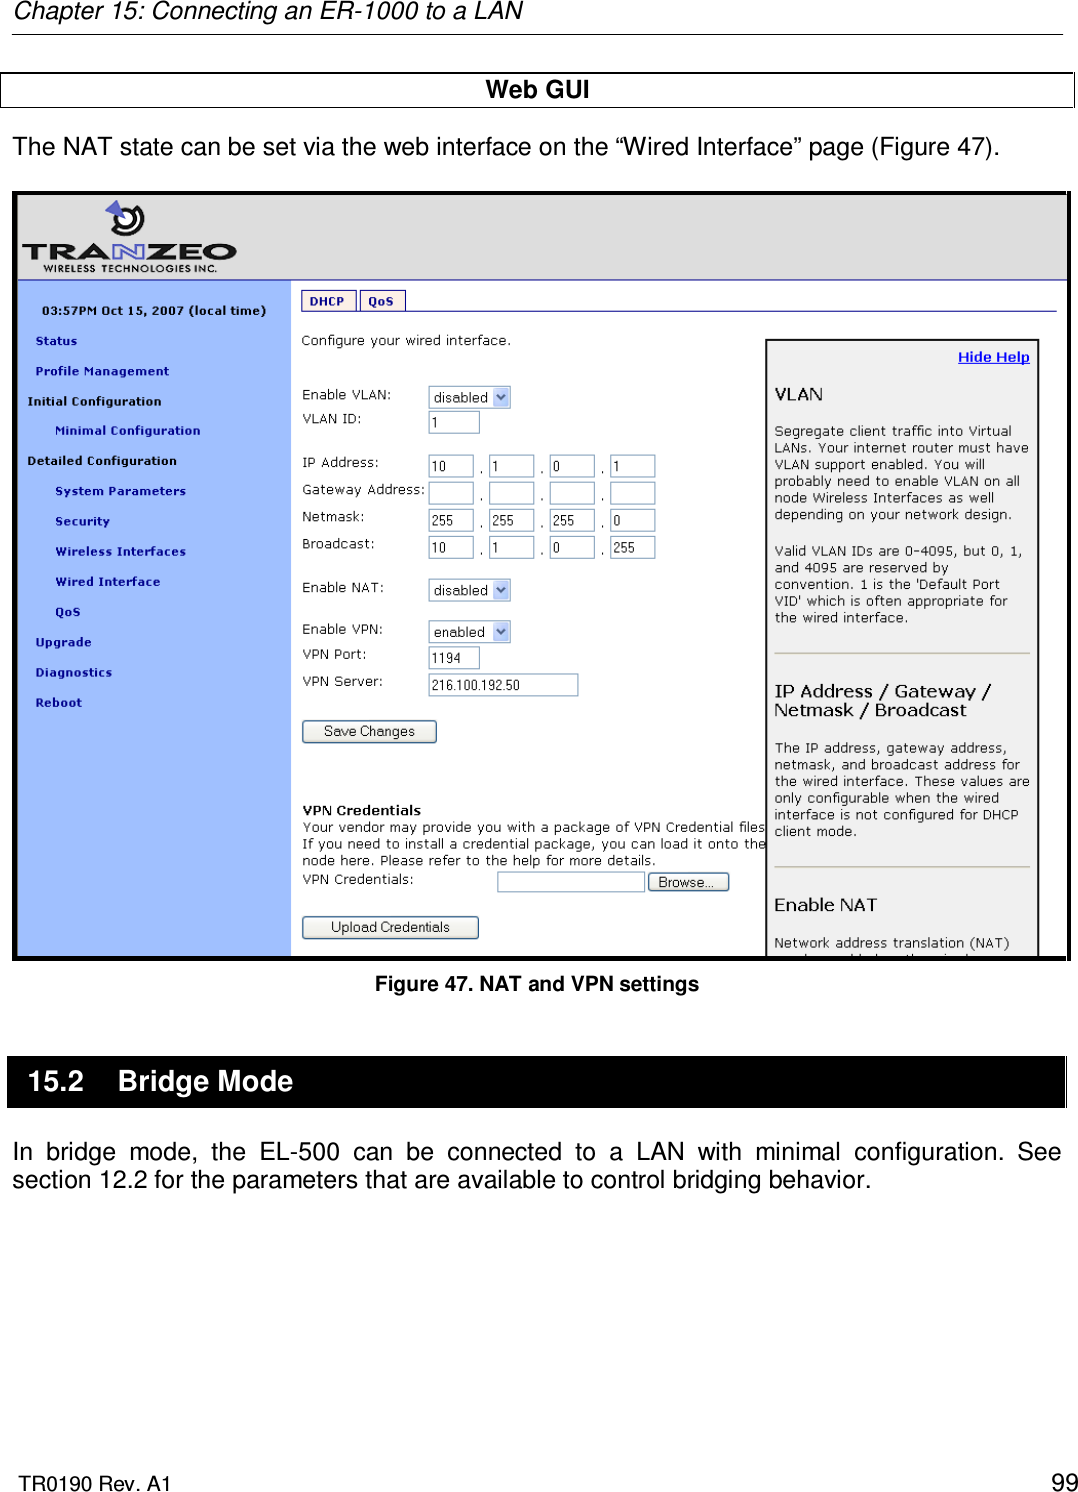 Chapter 15: Connecting an ER-1000 to a LAN  TR0190 Rev. A1    99 Web GUI The NAT state can be set via the web interface on the “Wired Interface” page (Figure 47).   Figure 47. NAT and VPN settings 15.2  Bridge Mode In  bridge  mode,  the  EL-500  can  be  connected  to  a  LAN  with  minimal  configuration.  See section 12.2 for the parameters that are available to control bridging behavior.  